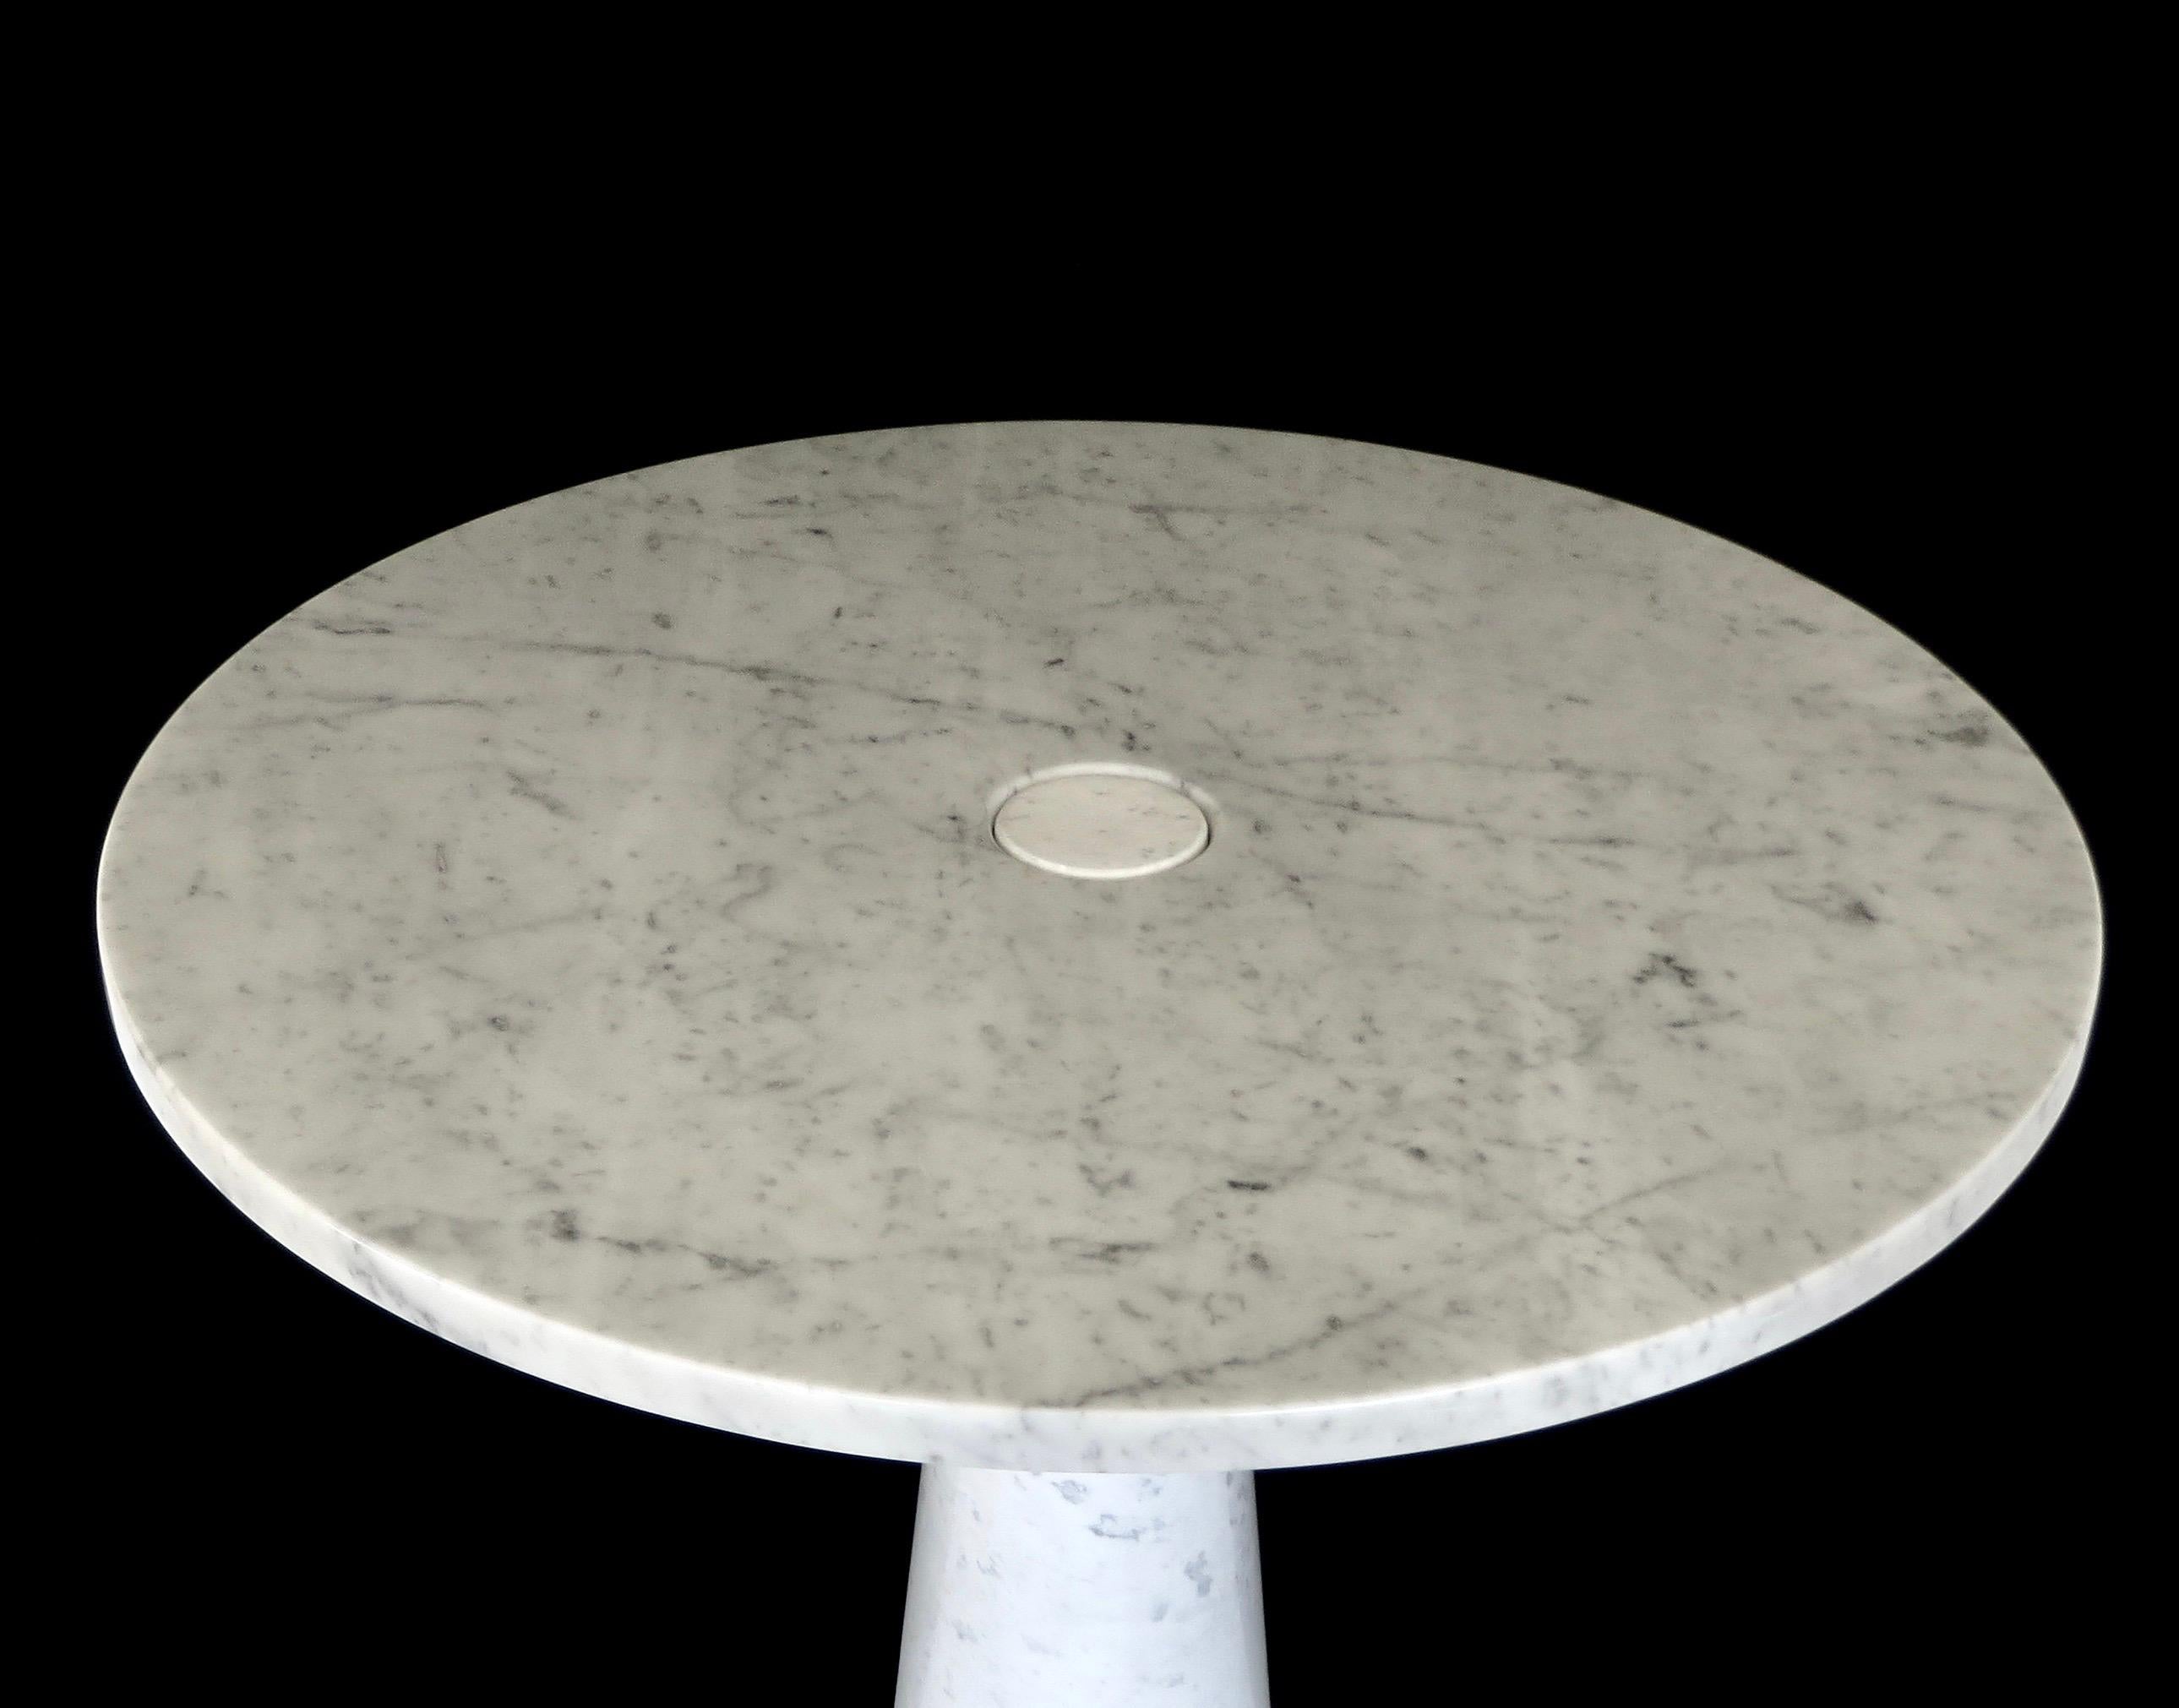 Carrara Marble Angelo Mangiarotti Italian Dining Table for Skipper Eros Collection Vintage